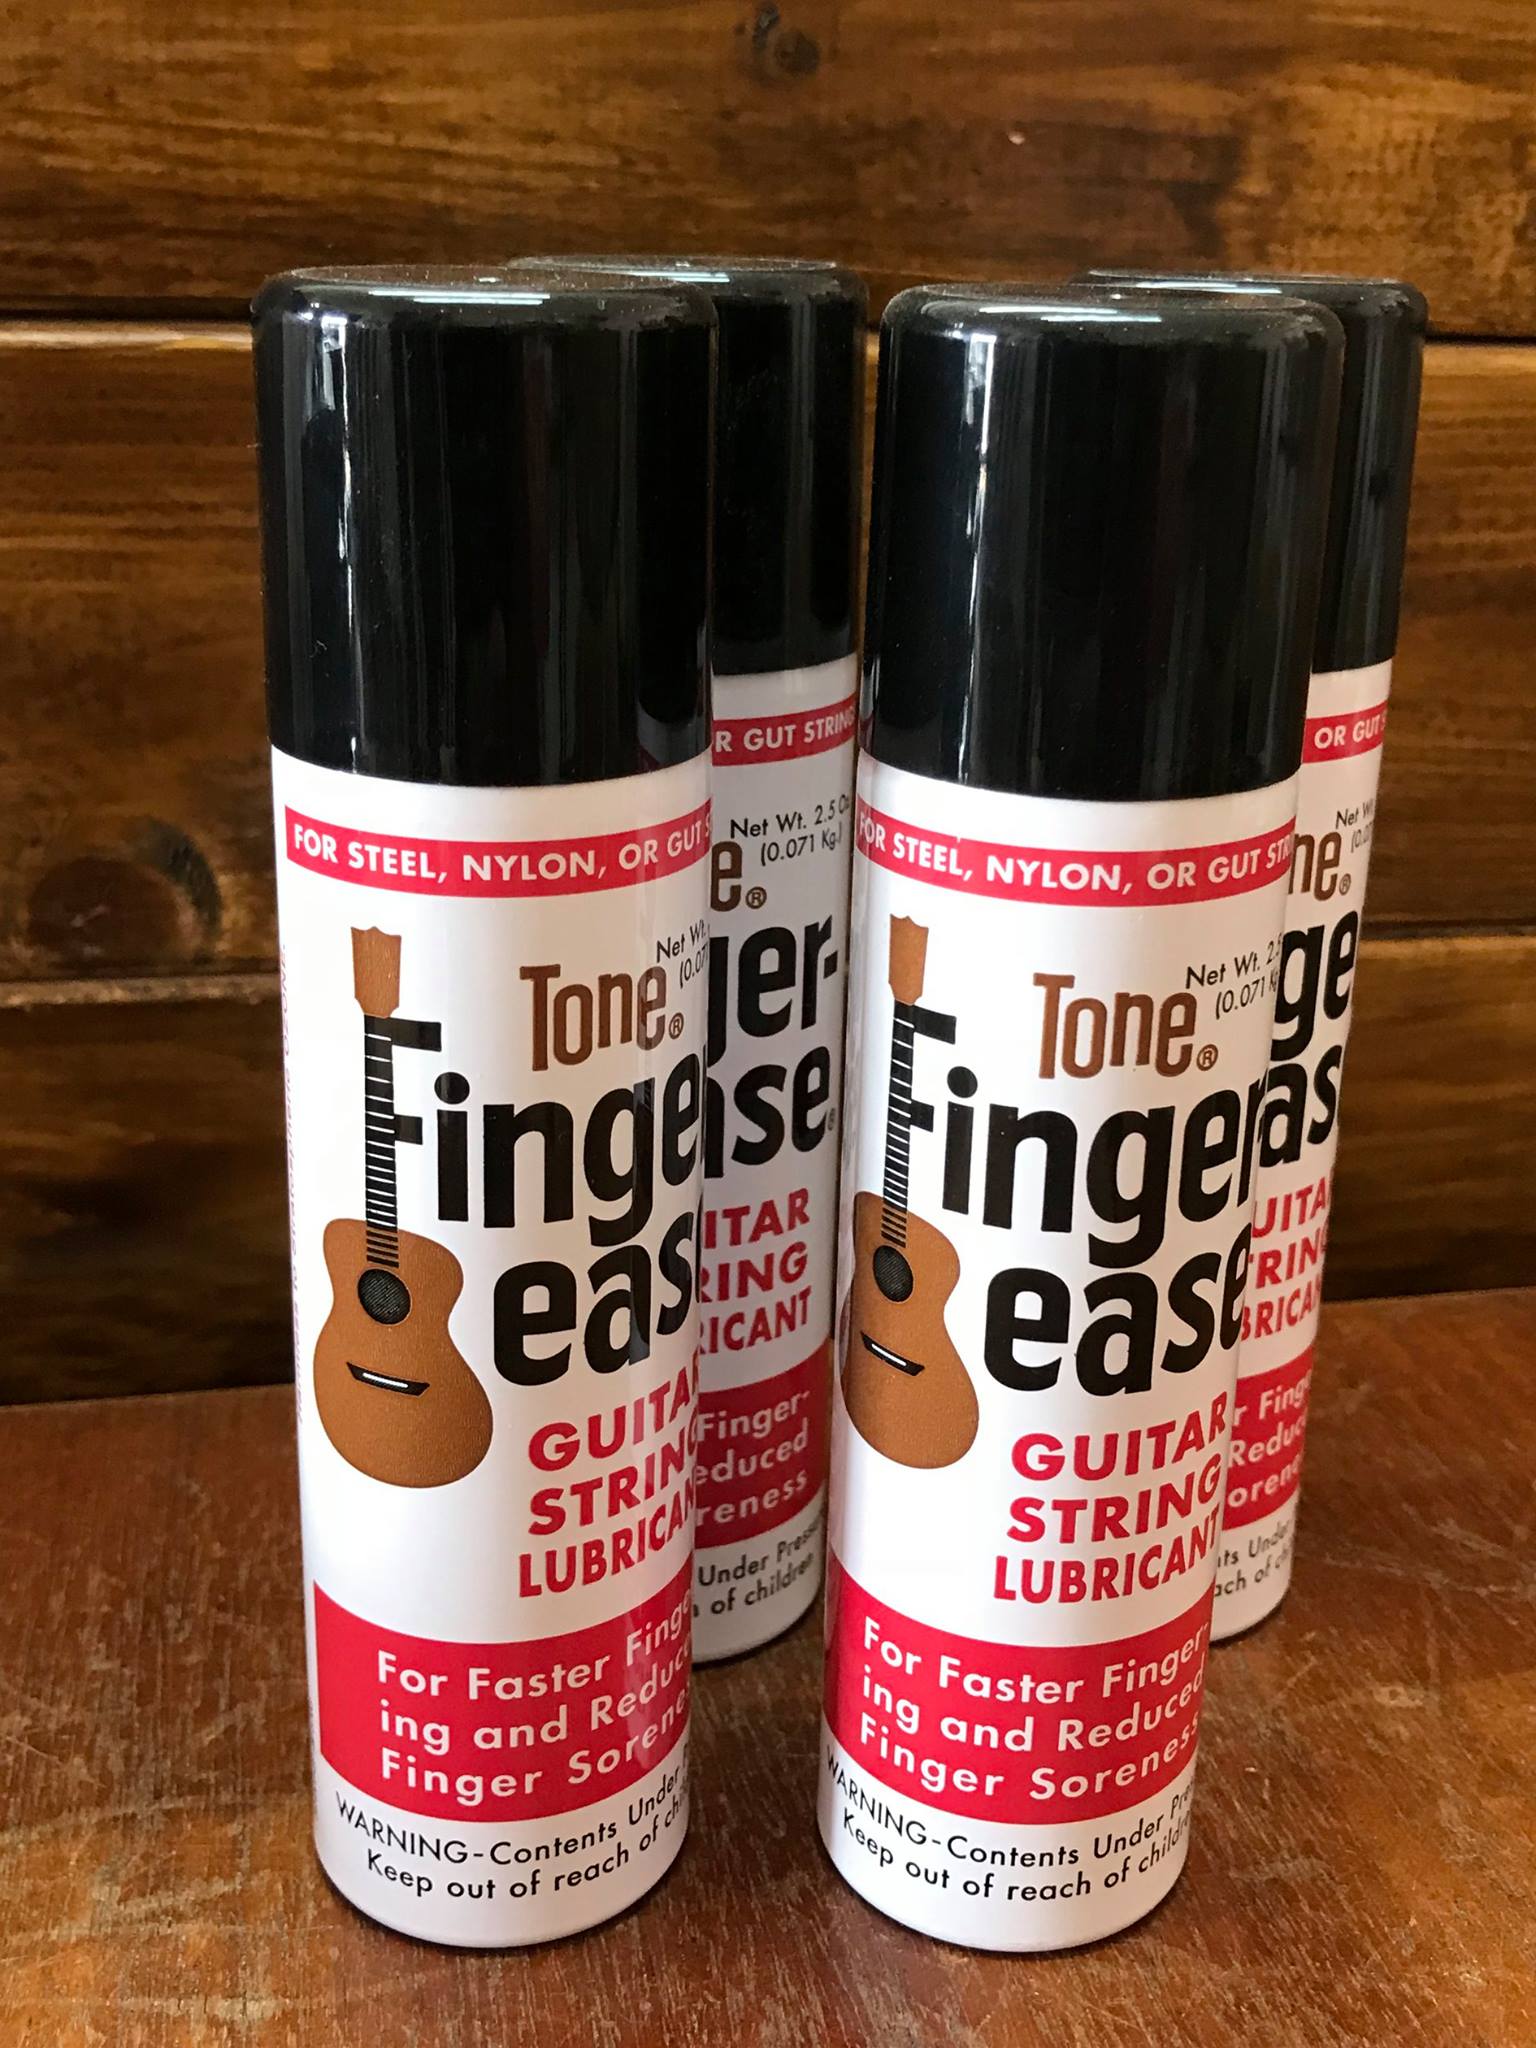 Tone Finger Ease 3本セット "フィンガーイーズ" 